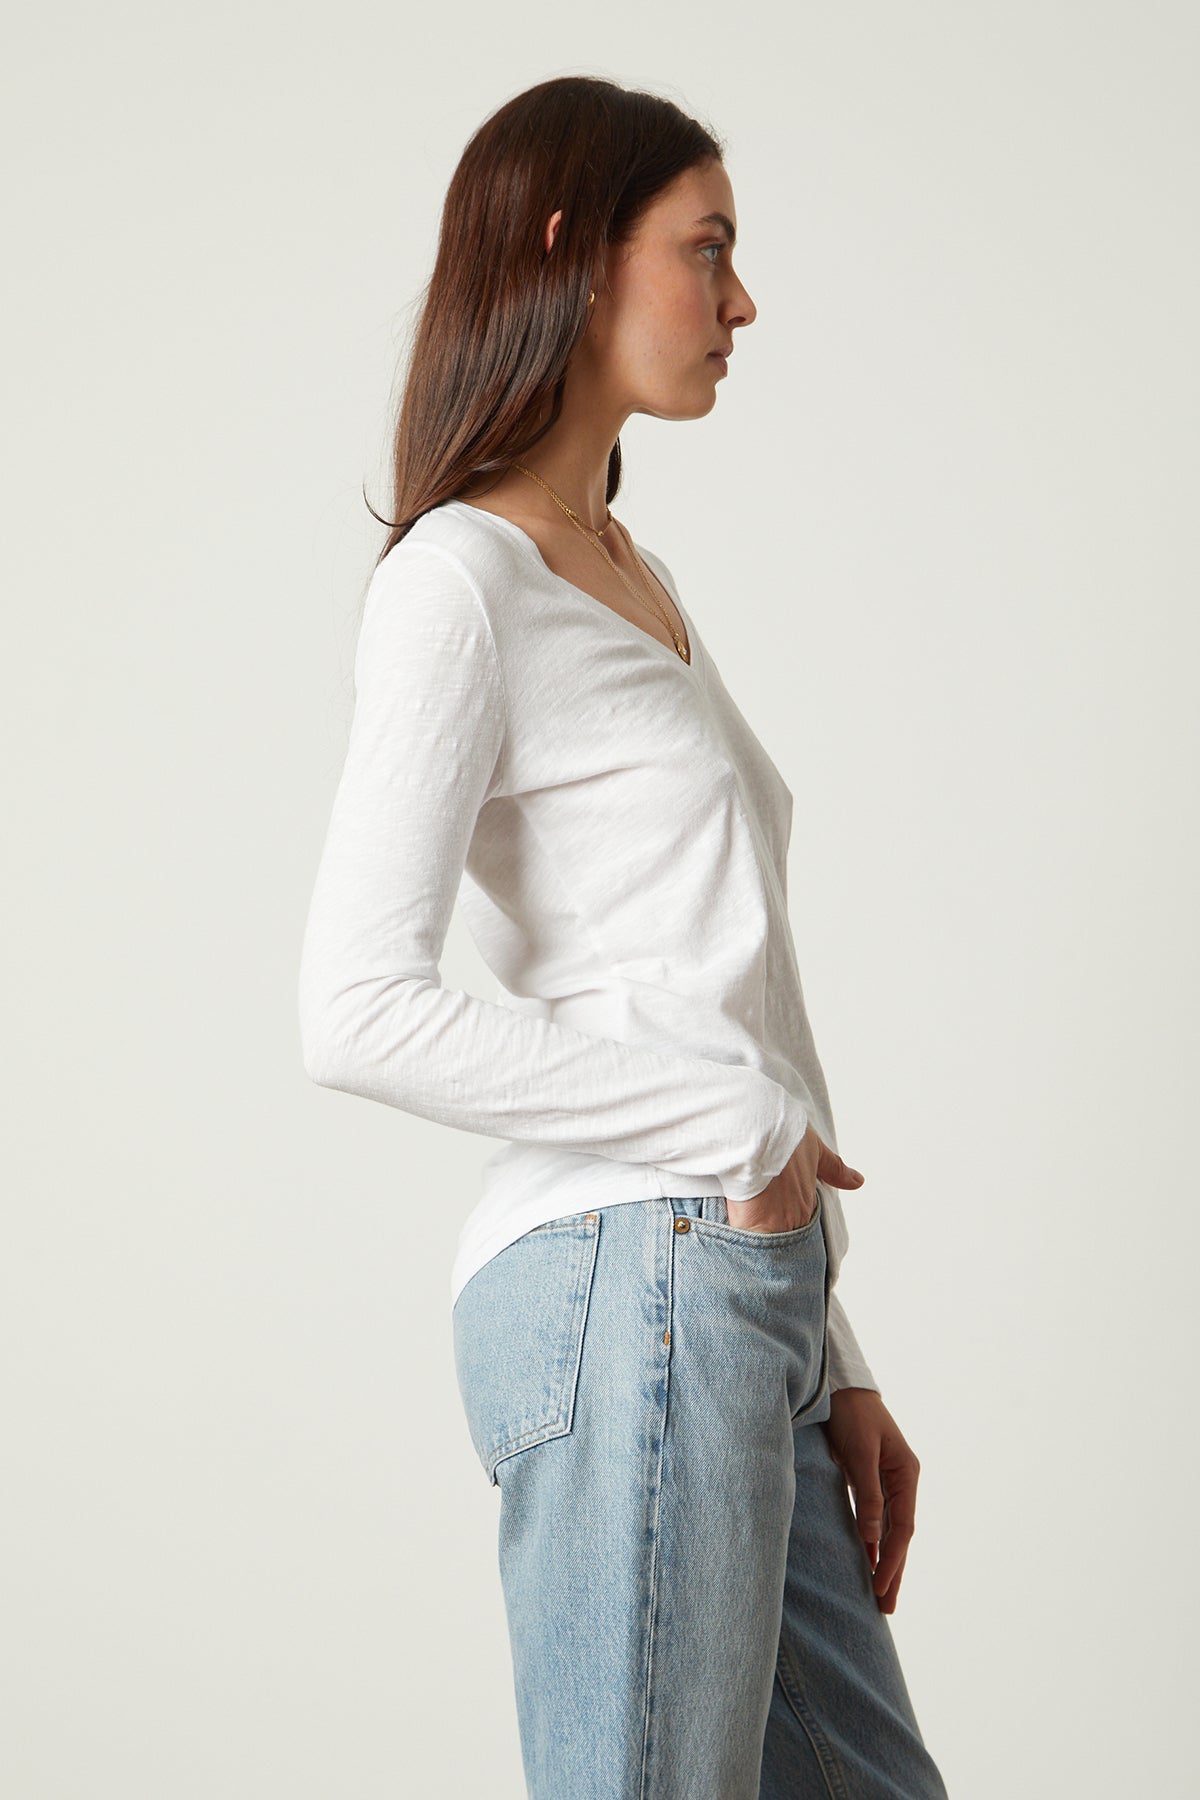 Blaire Original Slub Long Sleeve Tee with V Neck in white with light blue denim side view-25261593198785